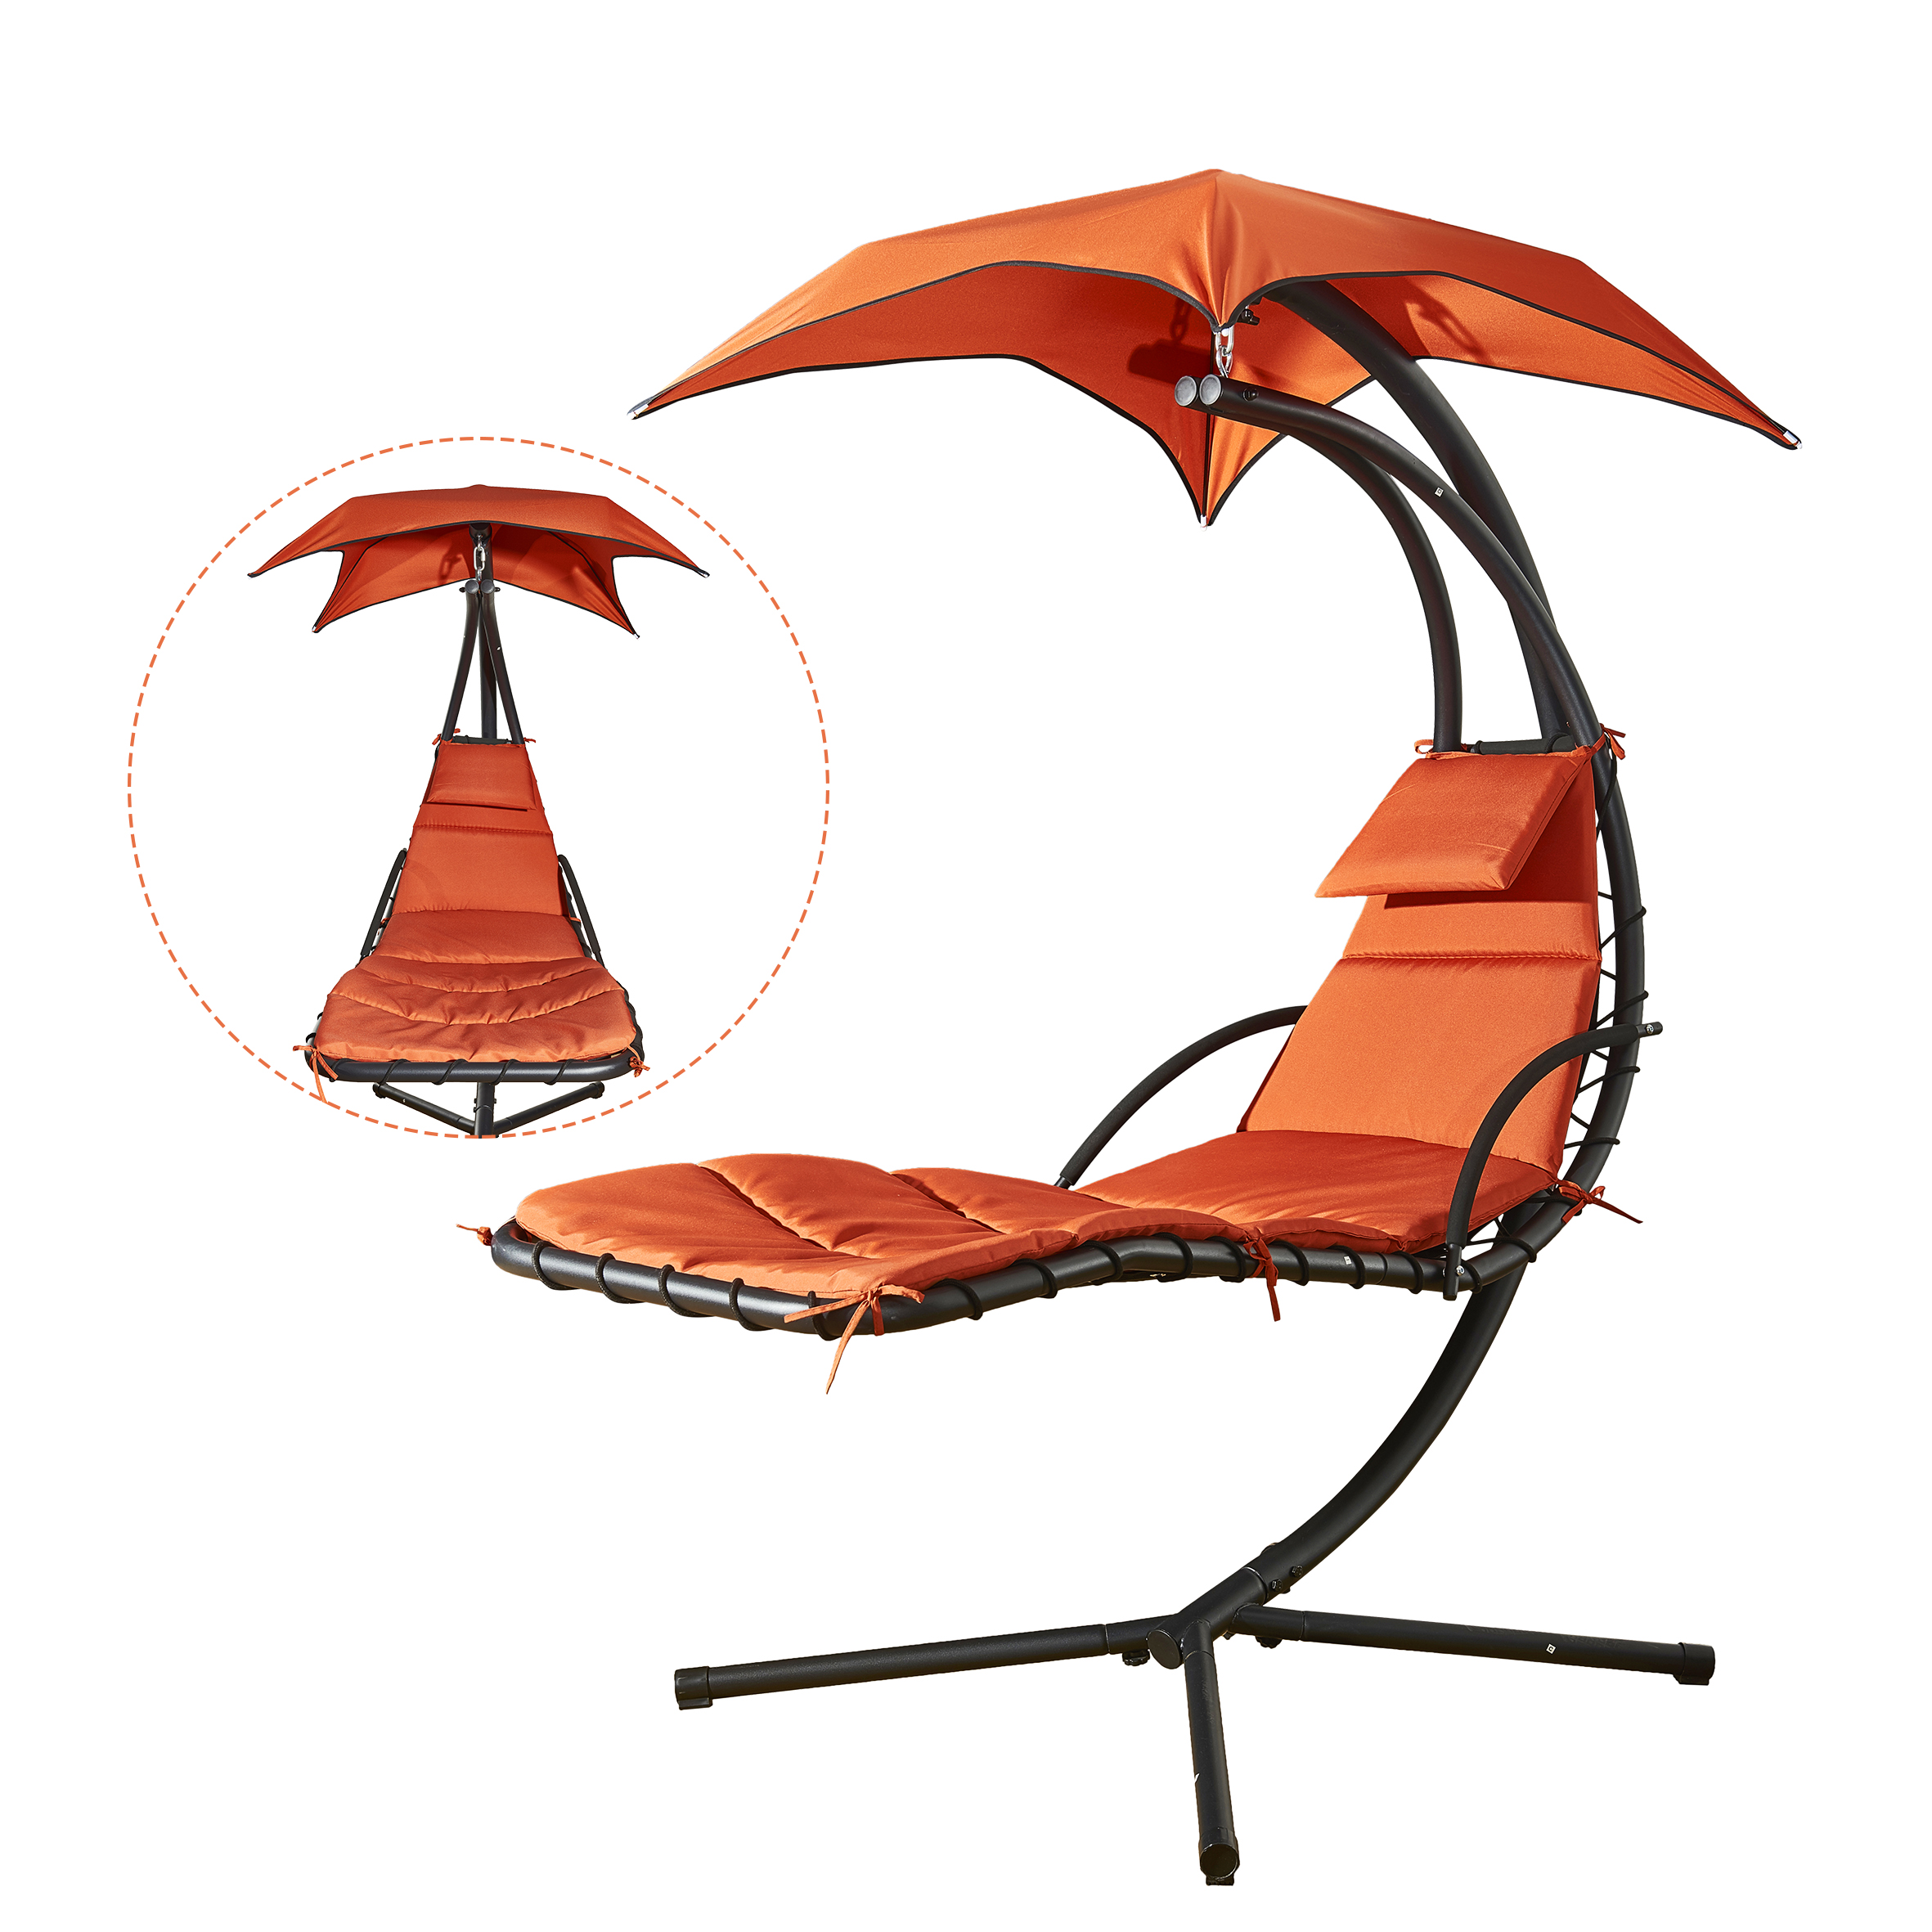 Finefind Hanging Chair Patio Chaise Lounge Hammock Floating Swing Chair Outdoor Orange Garden Deck and Poolside - image 3 of 7